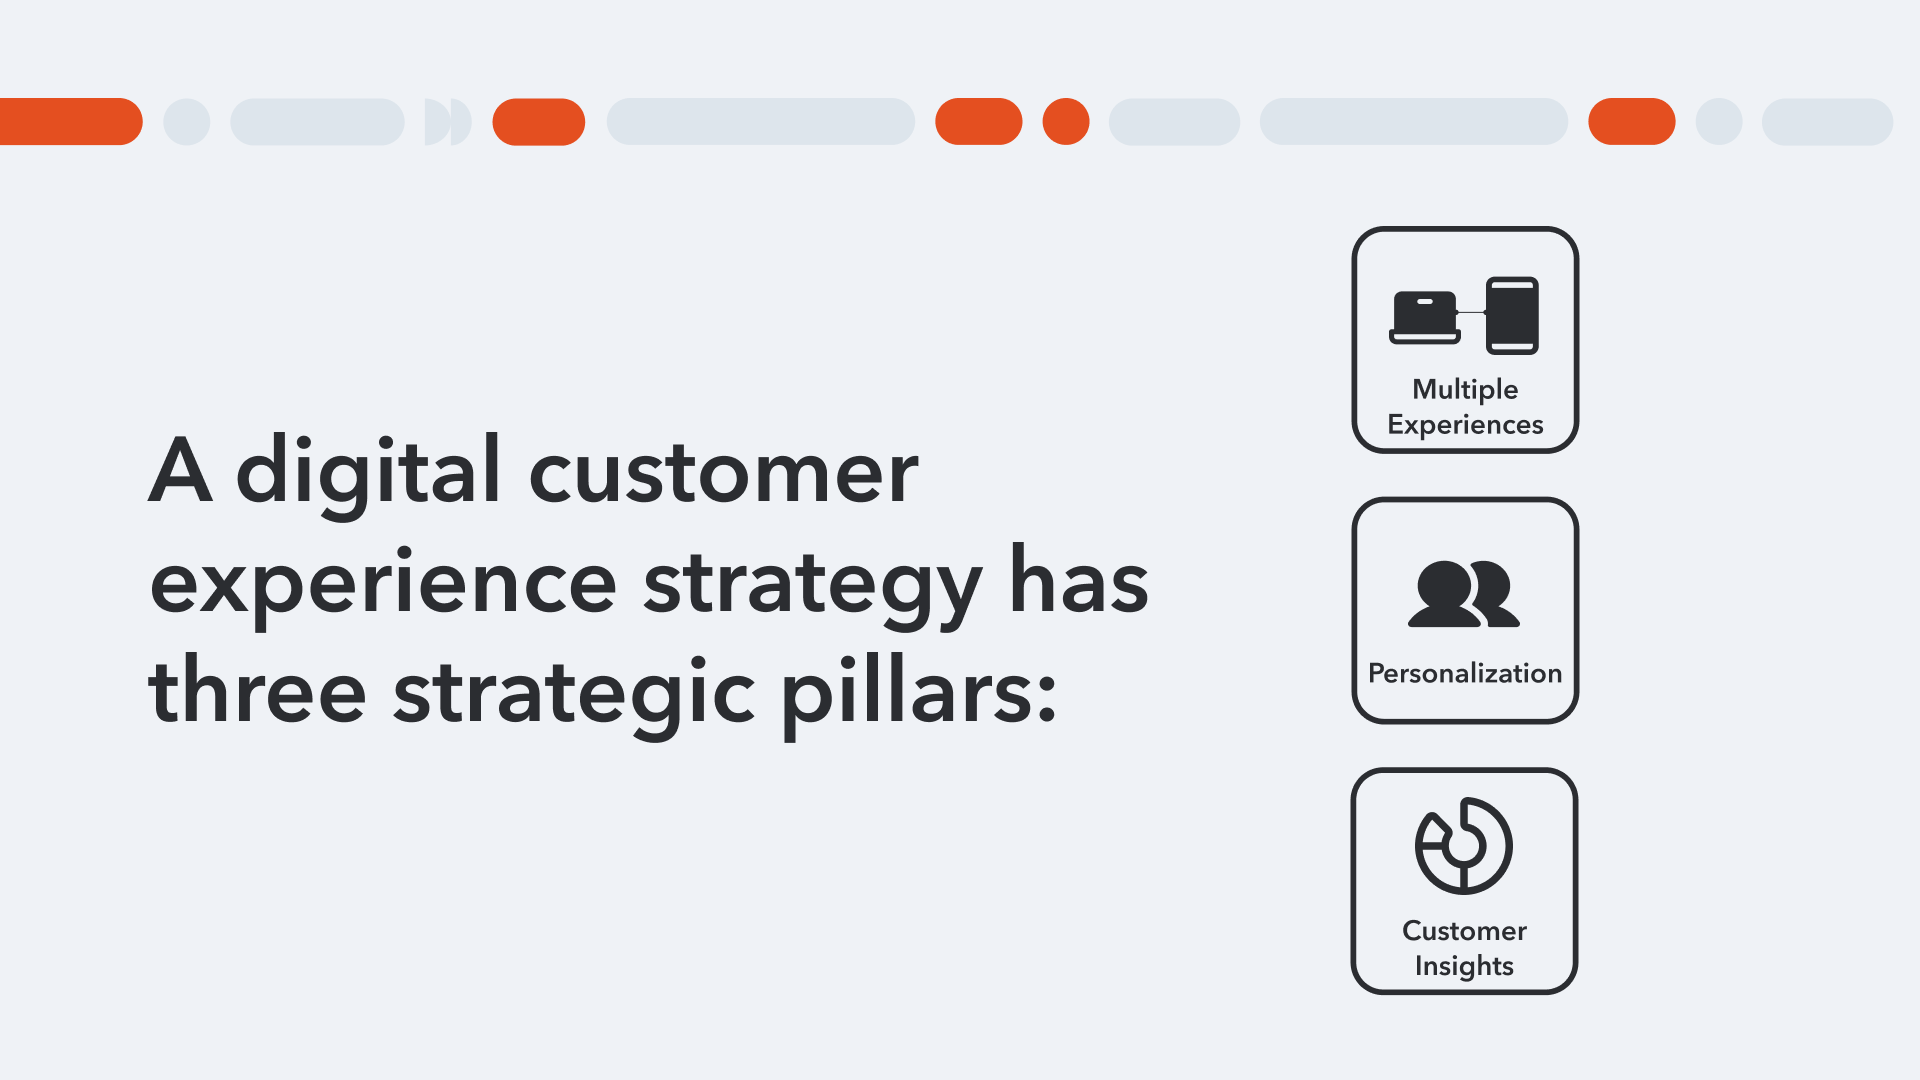 A digital customer experience strategy has three strategic pillars: multiple experiences that connect to create a seamless customer experience across devices; personalization; and deep insight into who your customers are and what they want.